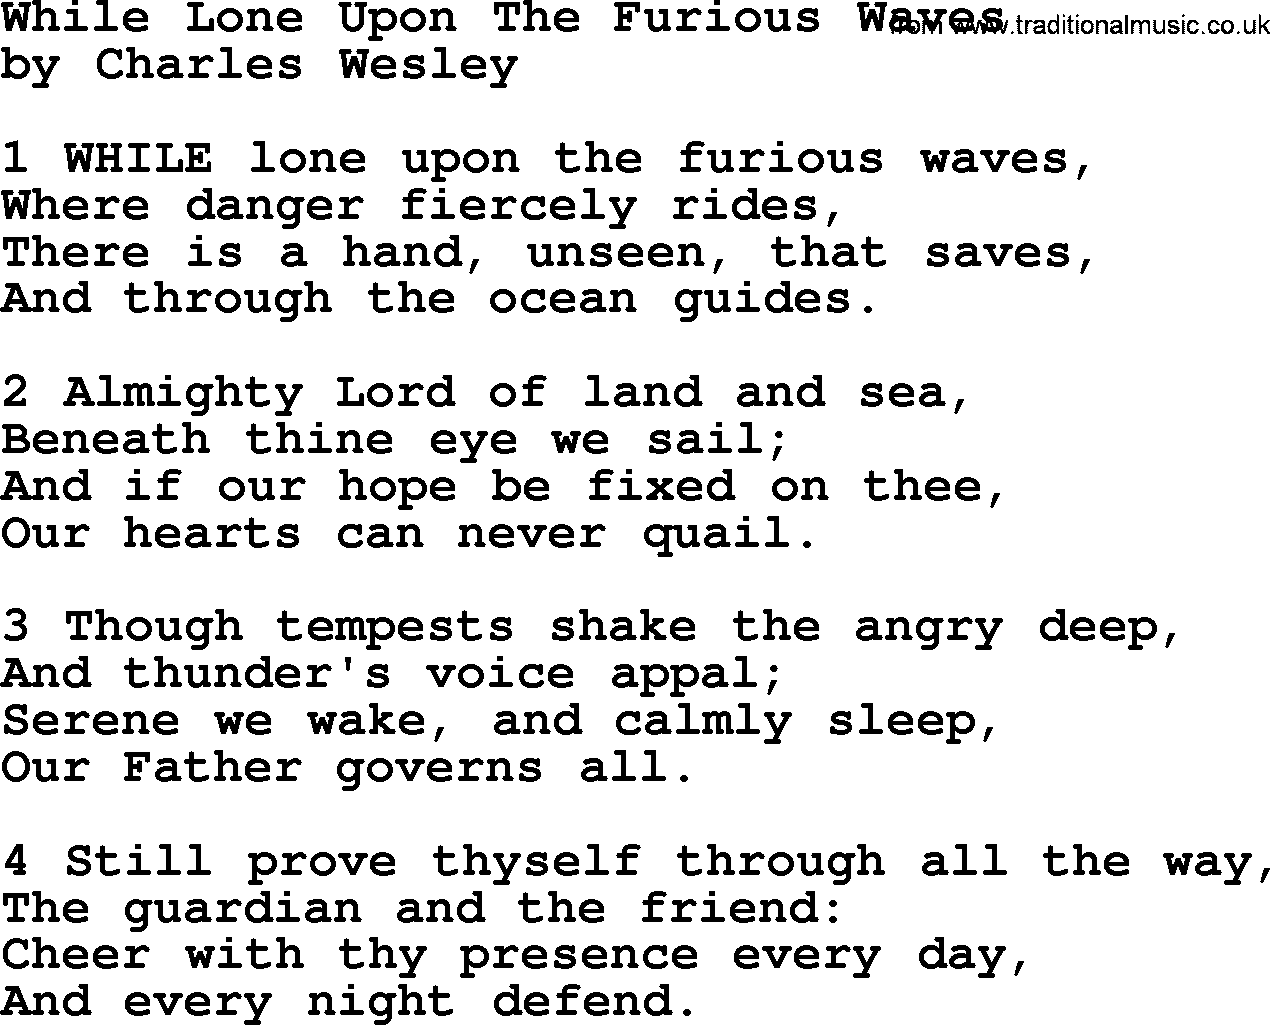 Charles Wesley hymn: While Lone Upon The Furious Waves, lyrics